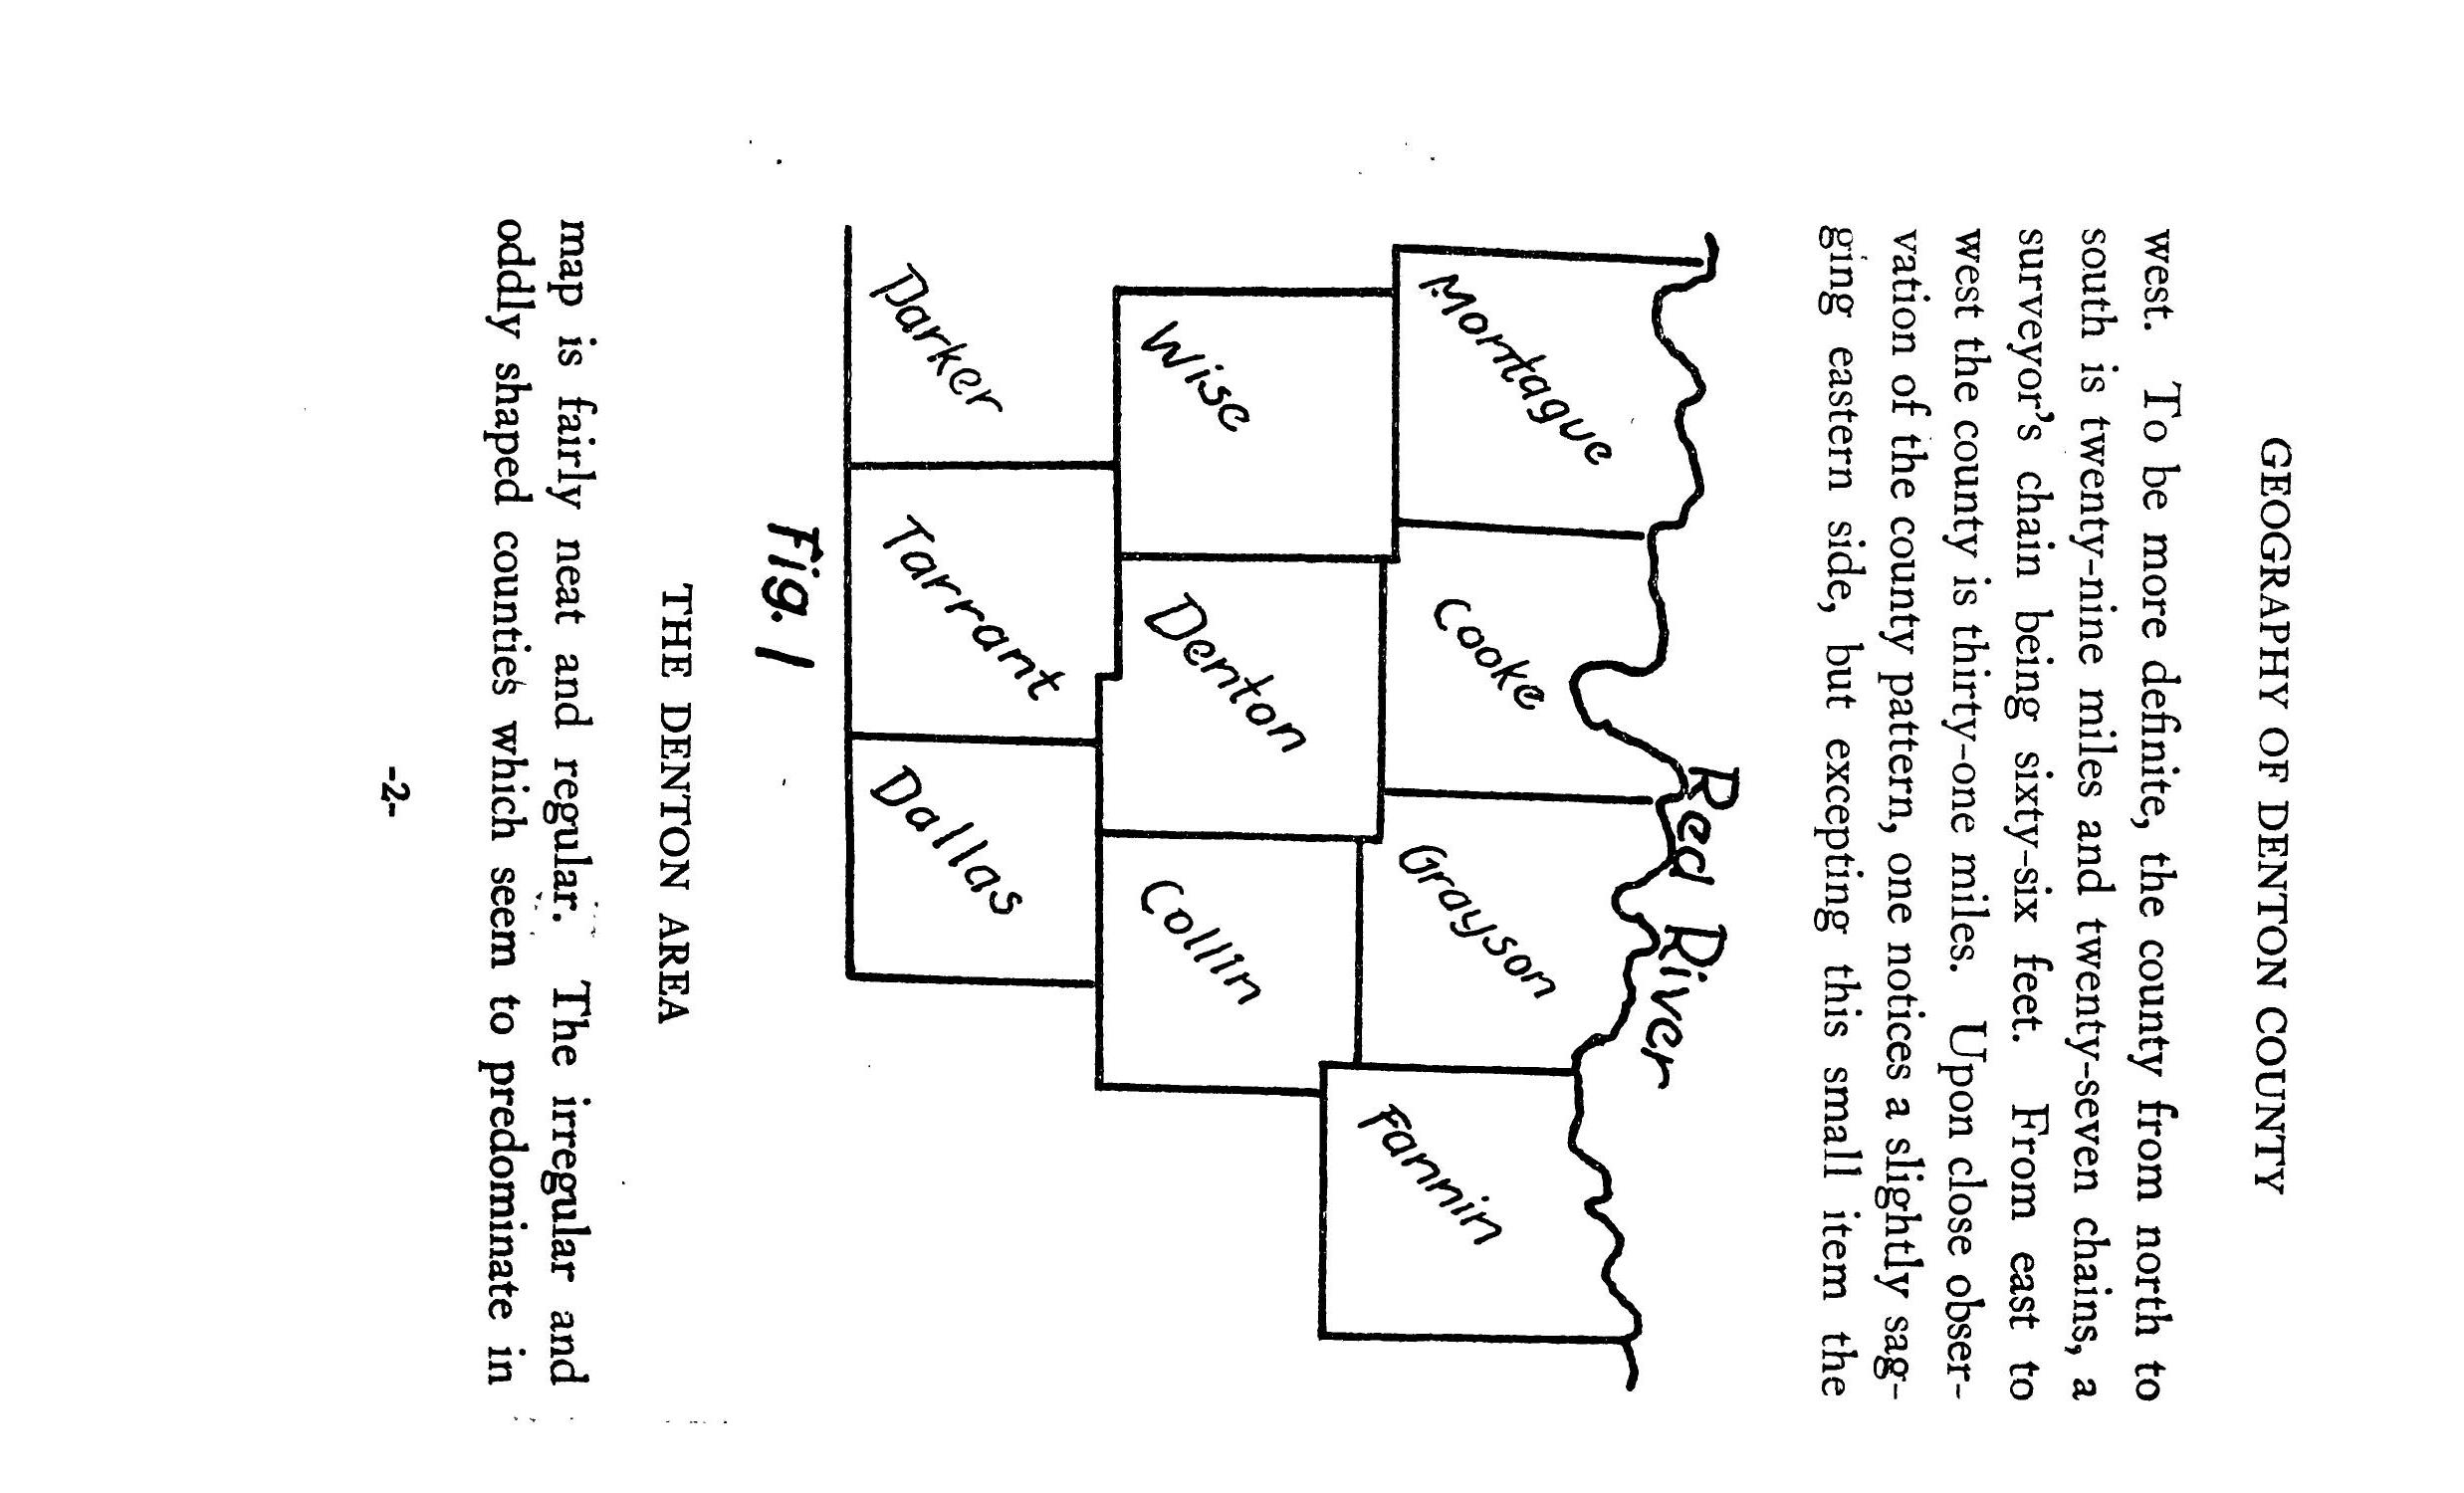 Geography of Denton County
                                                
                                                    2
                                                